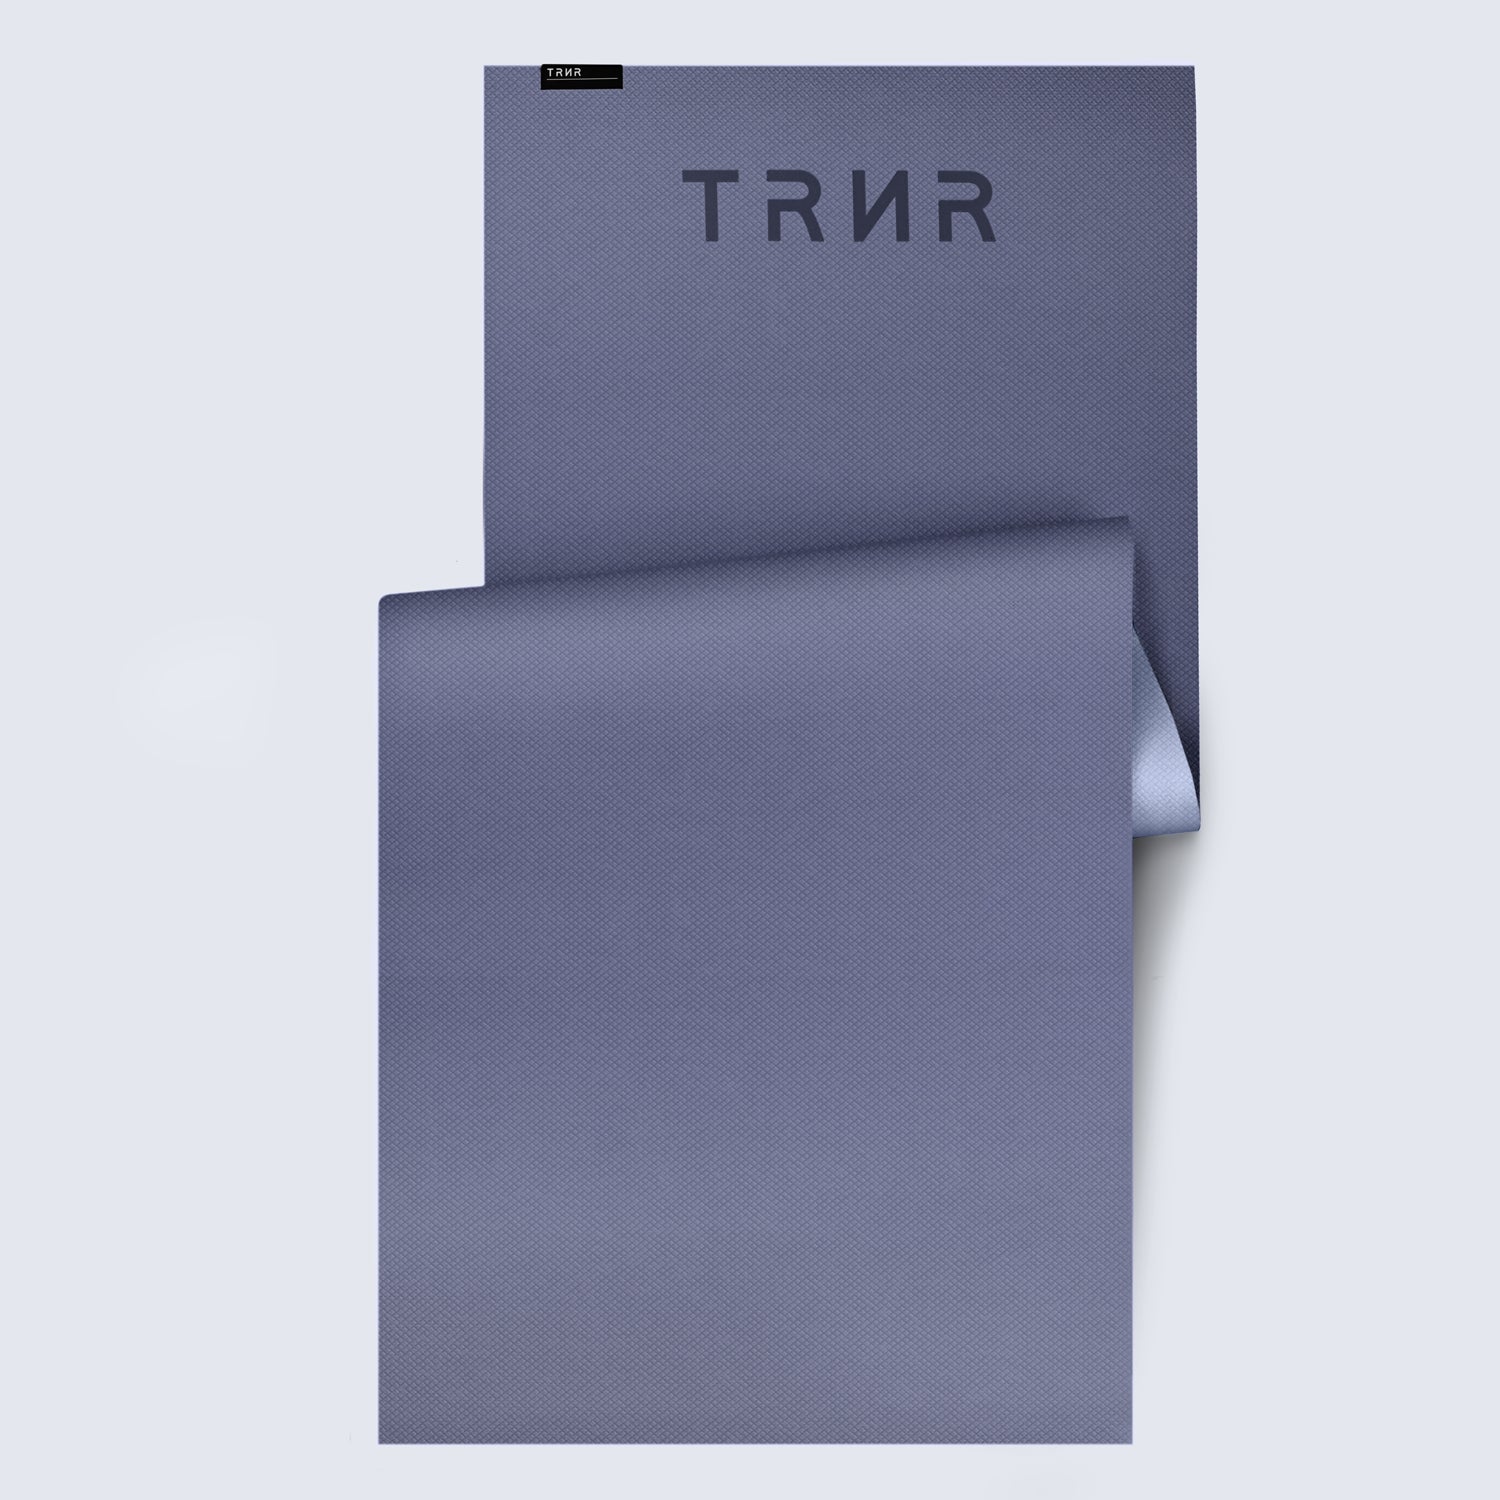  Overview of the Neo Mat 5 mm (Stormy Sky/Icy Blue Colour) by TRNR | Featuring Debossed TRNR Logo and Label